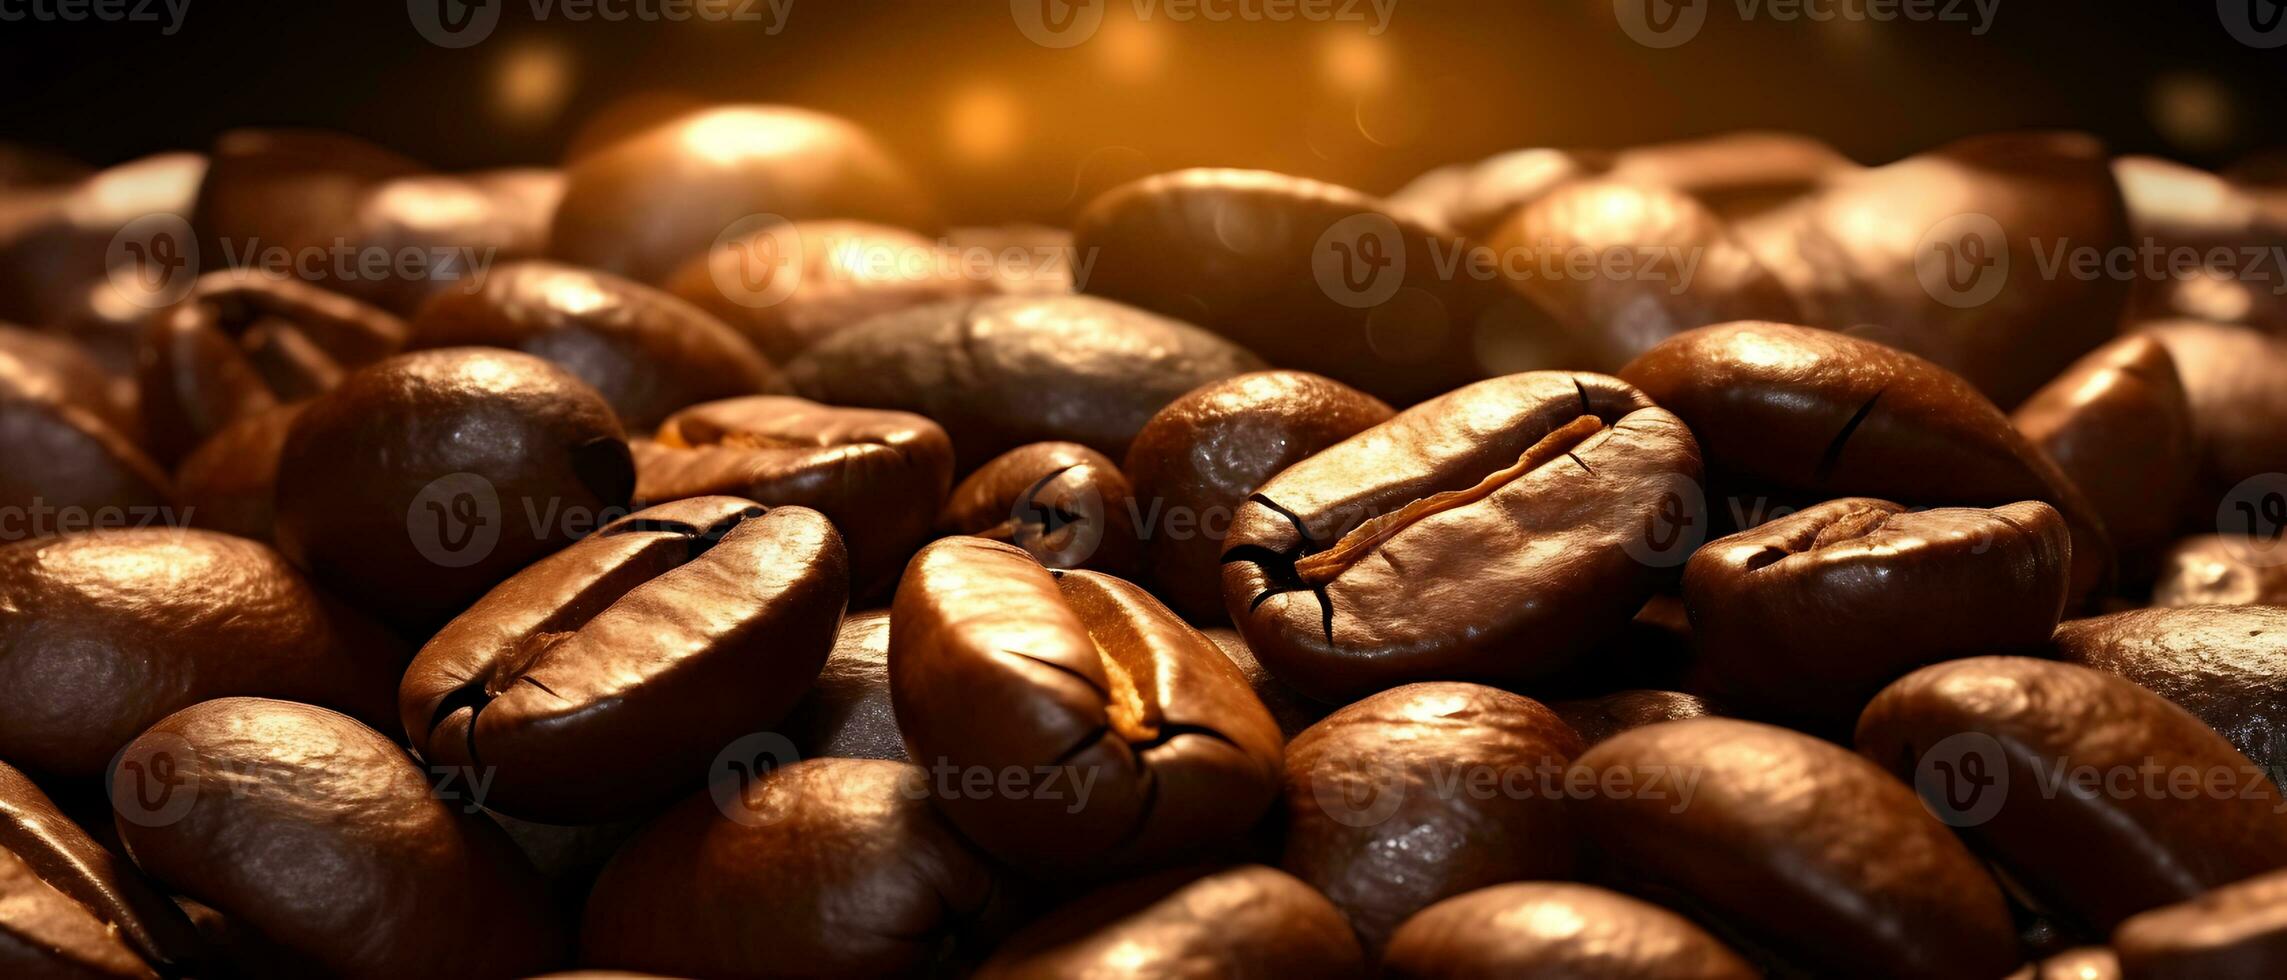 coffee beans background. Indulge in the close-up view of brown coffee beans, creating an enticing banner. Discover the intricate details of coffee grains with a closeup coffee grains background. photo